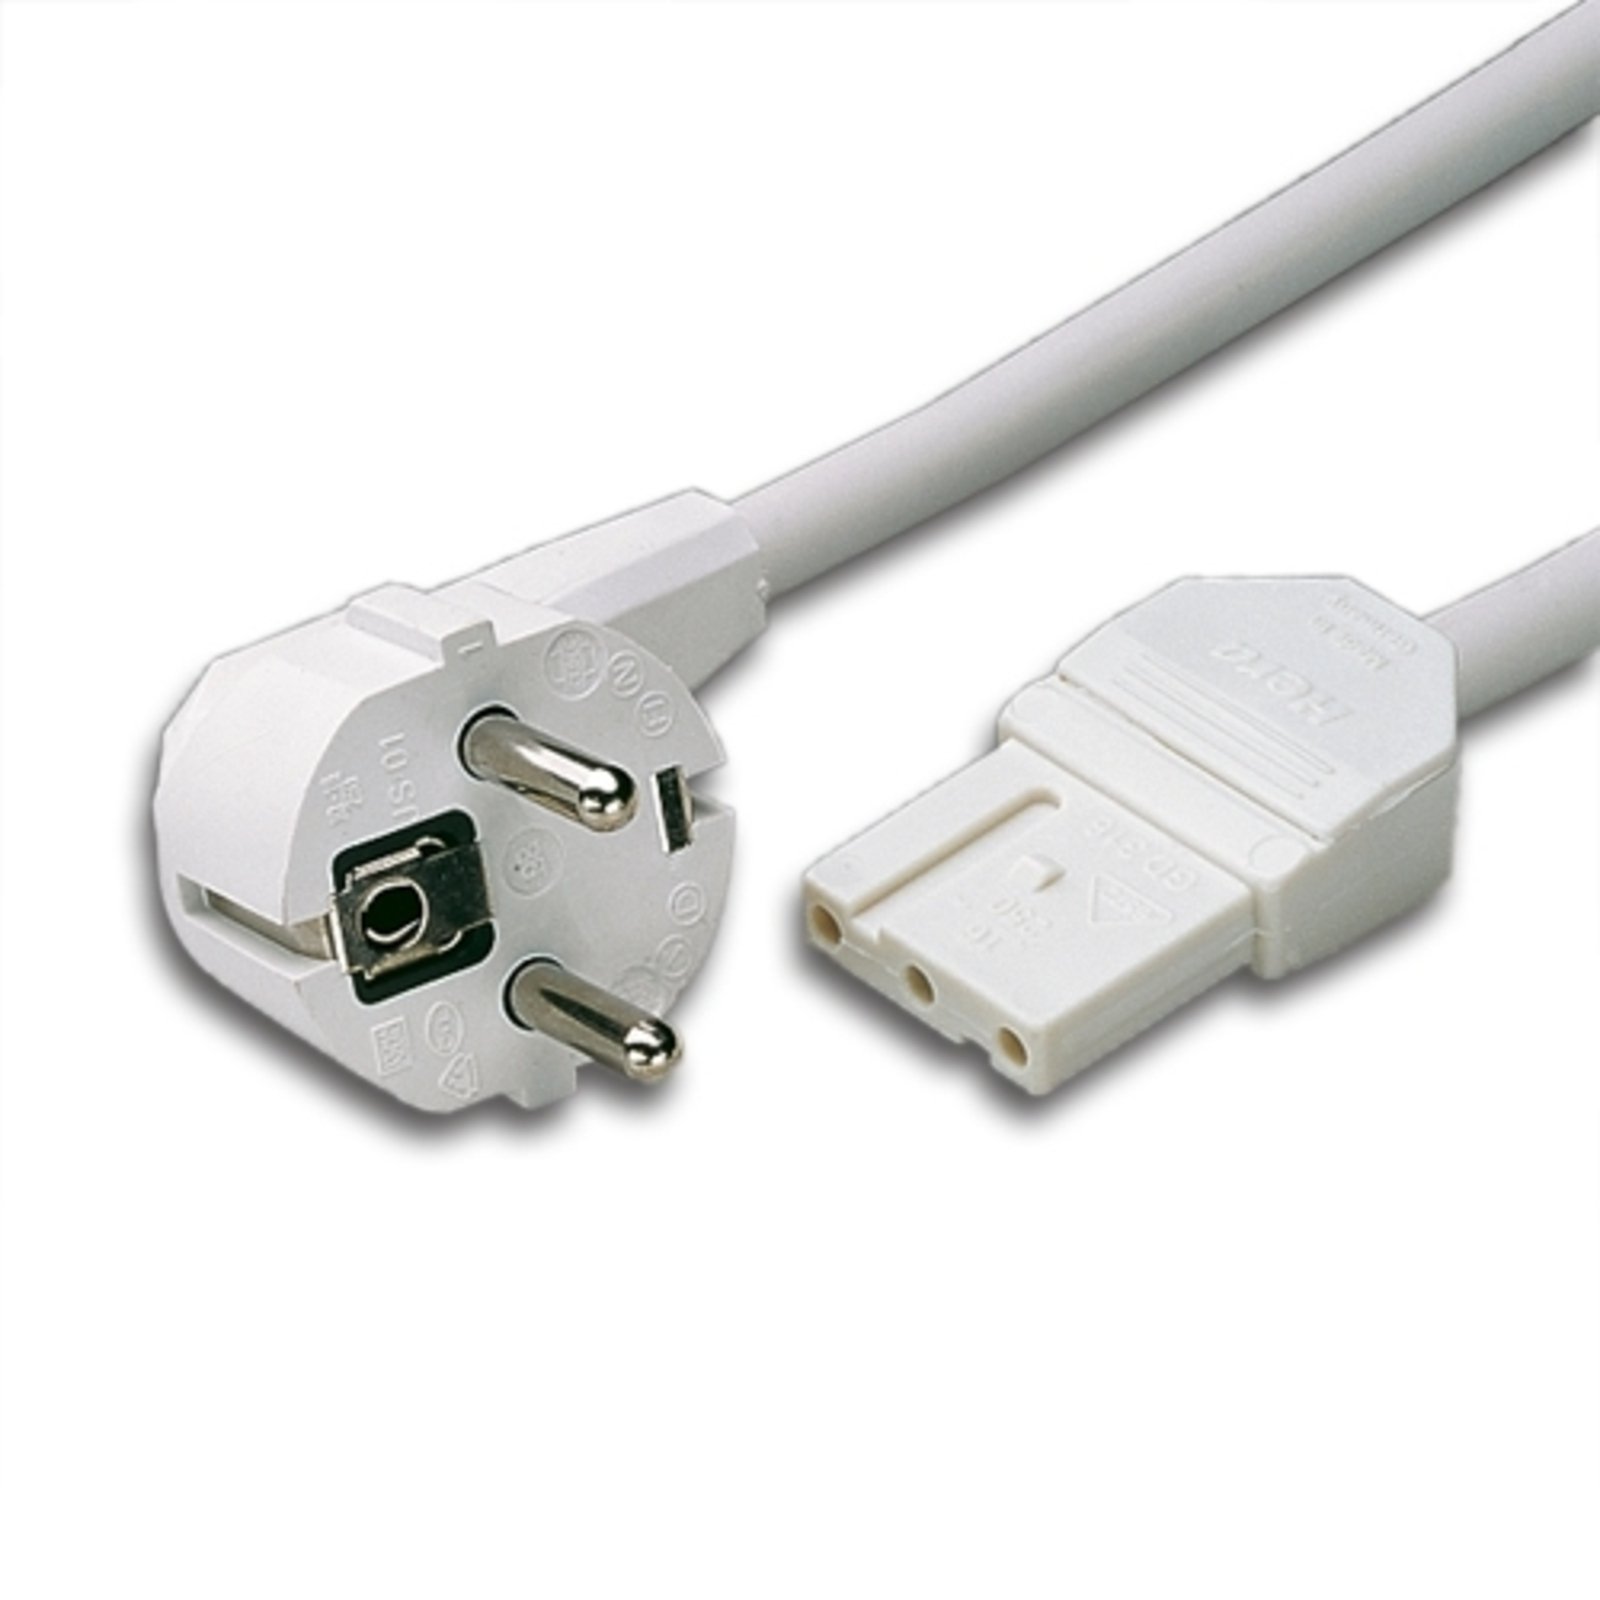 Network cable MK2